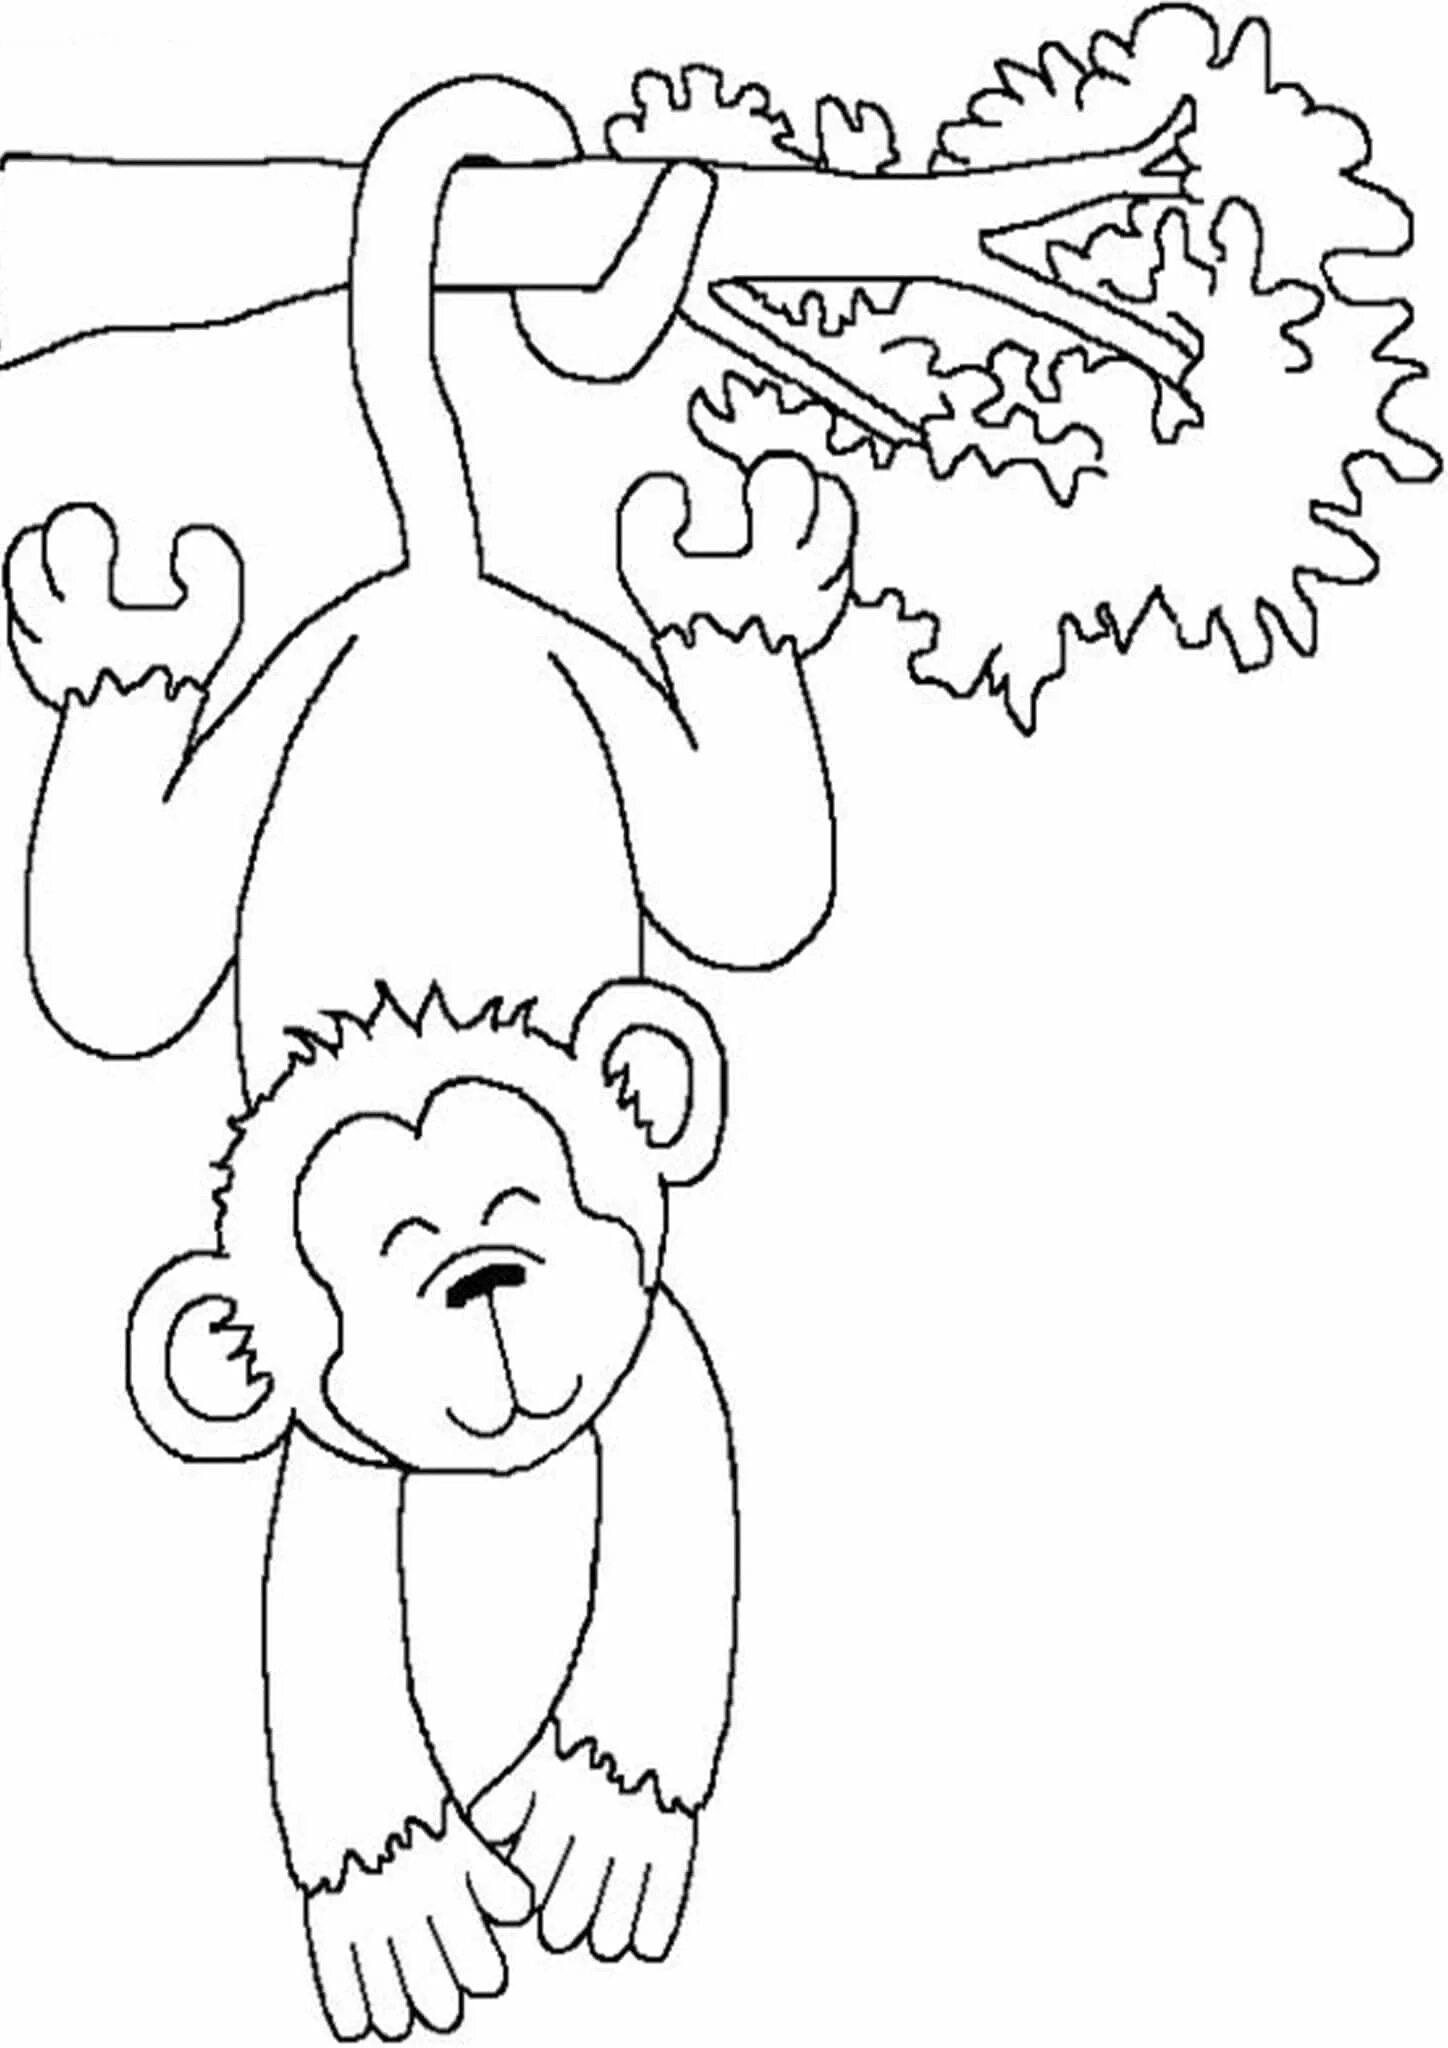 Magic monkey coloring page